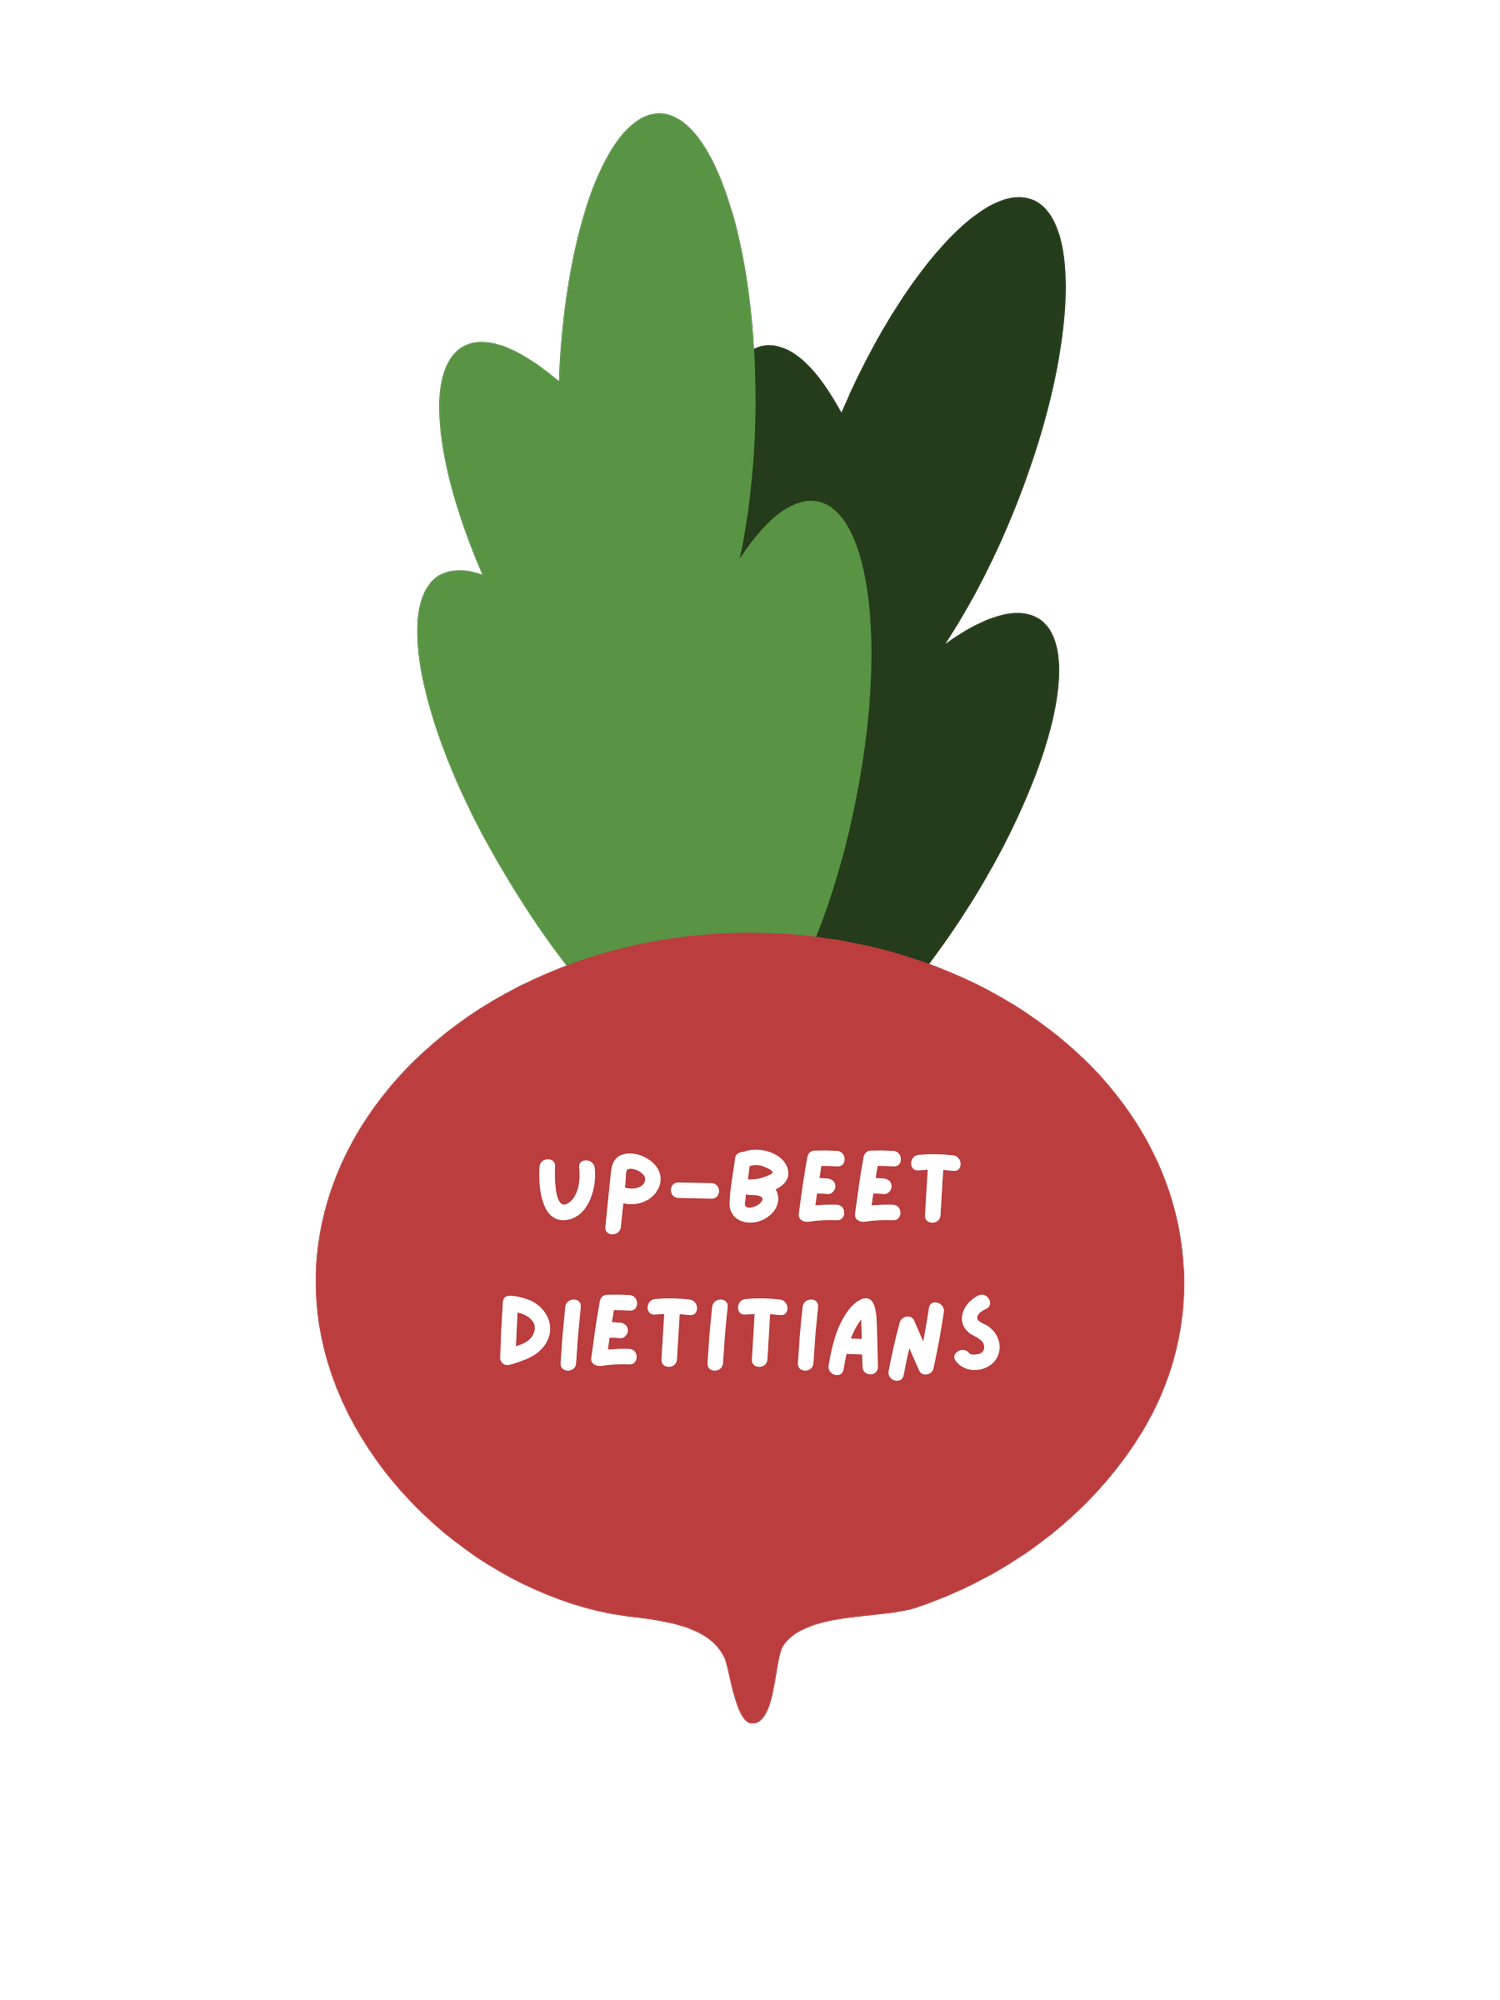 The Up-Beet Dietitians